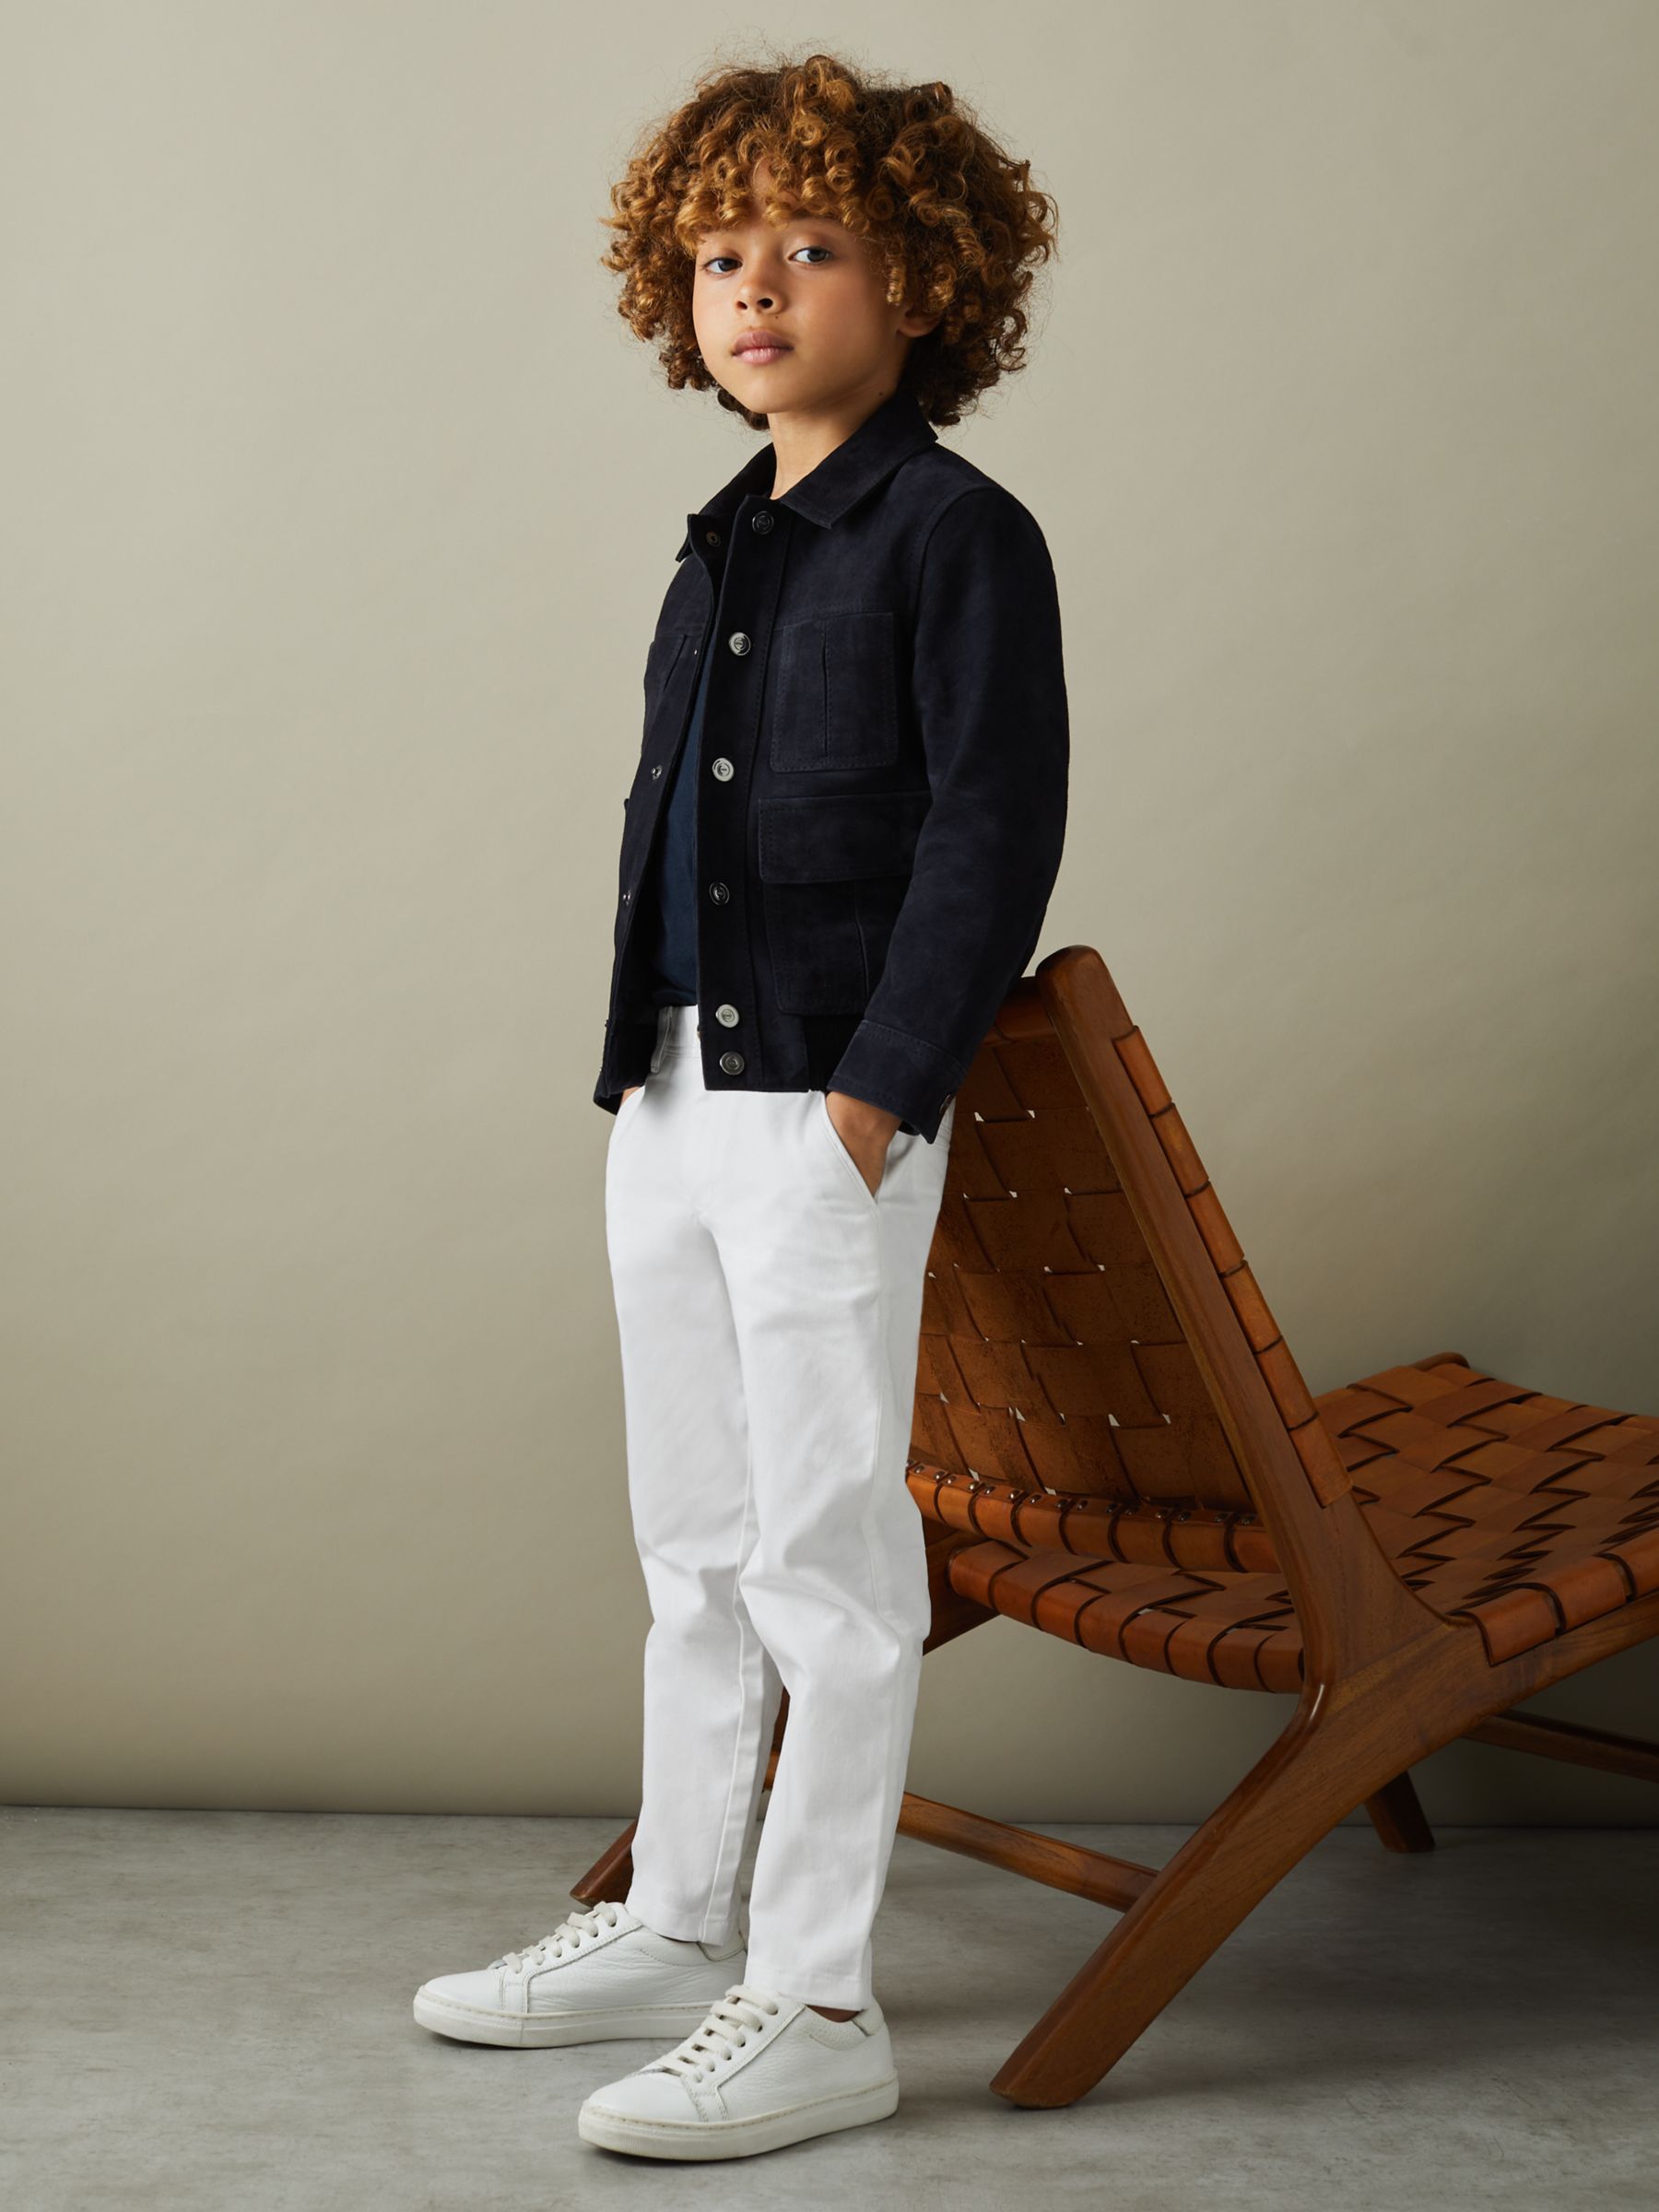 Reiss Kids' Pitch Cotton Blend Chinos, White, 13-14 years